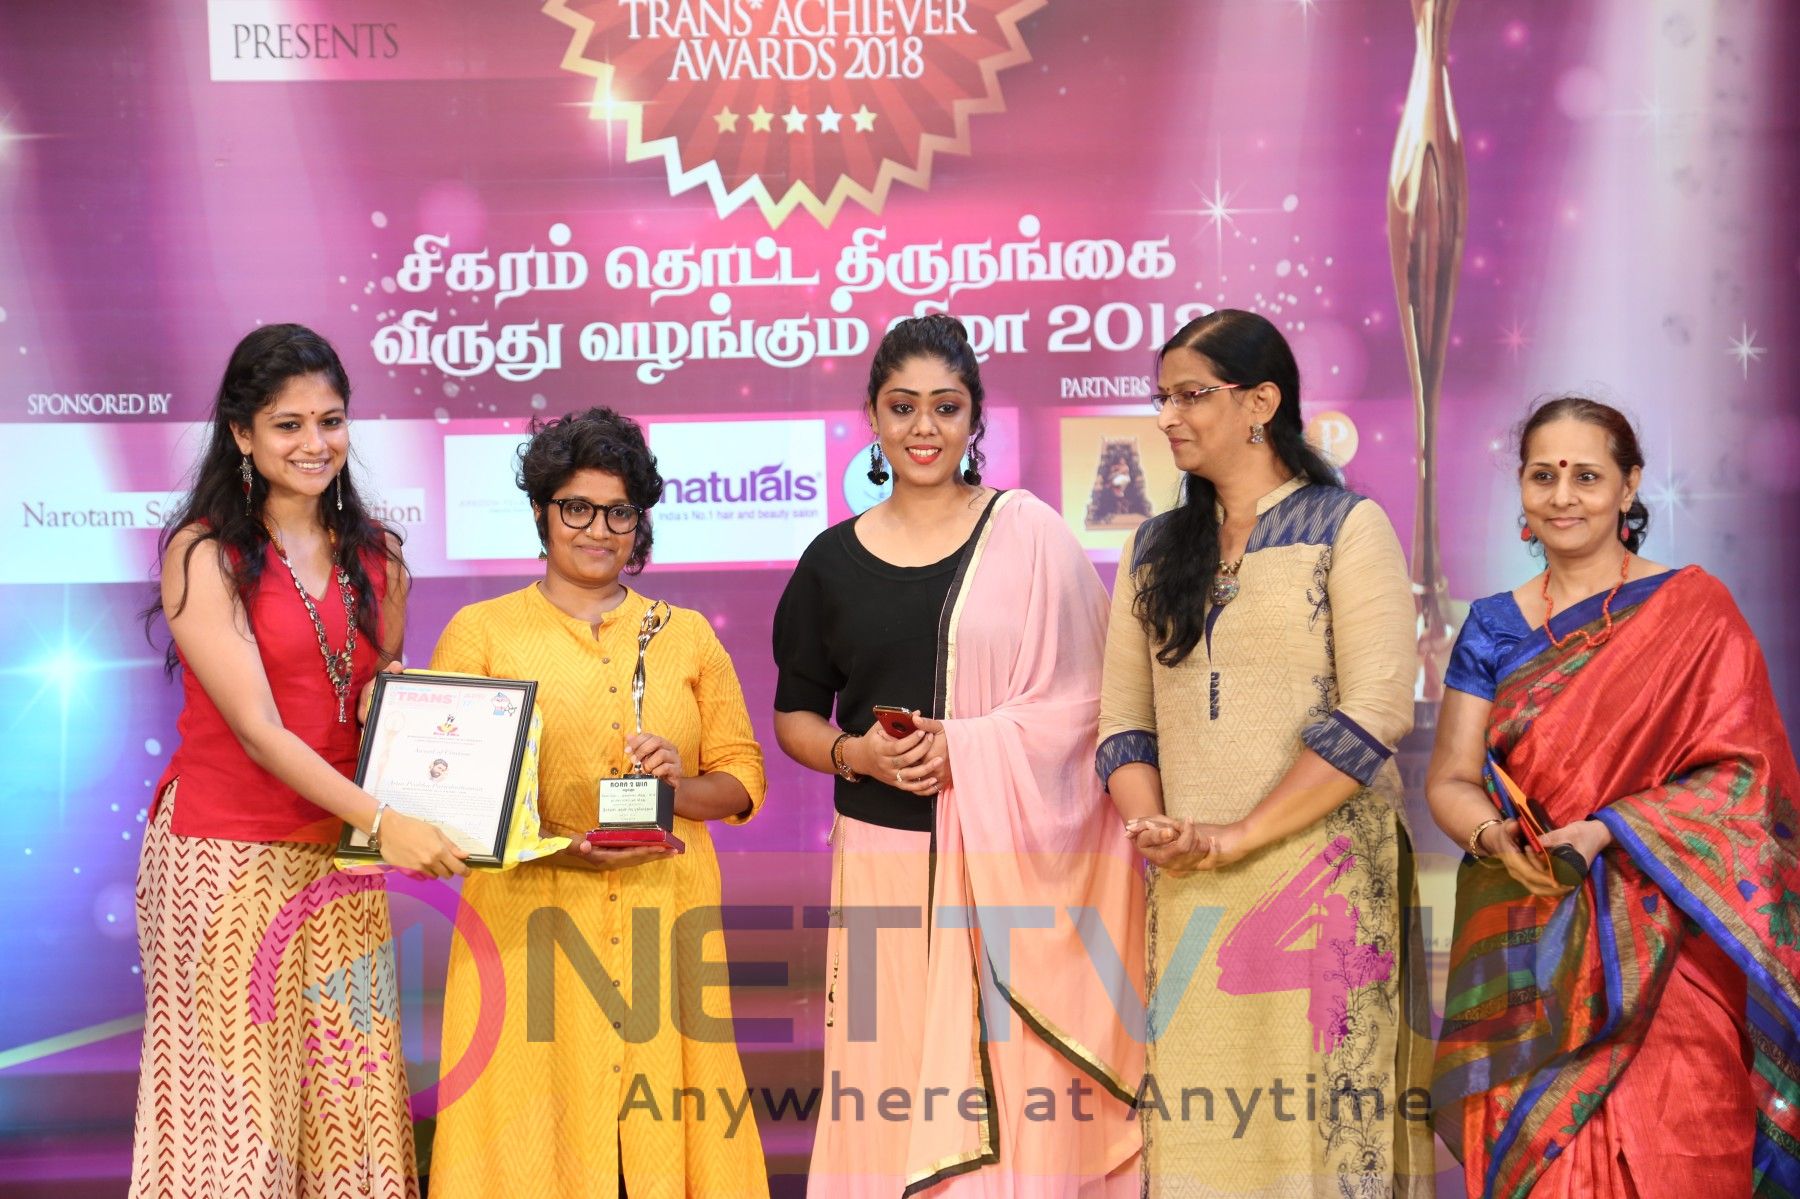 6th Trans Achiever Awards Images Tamil Gallery